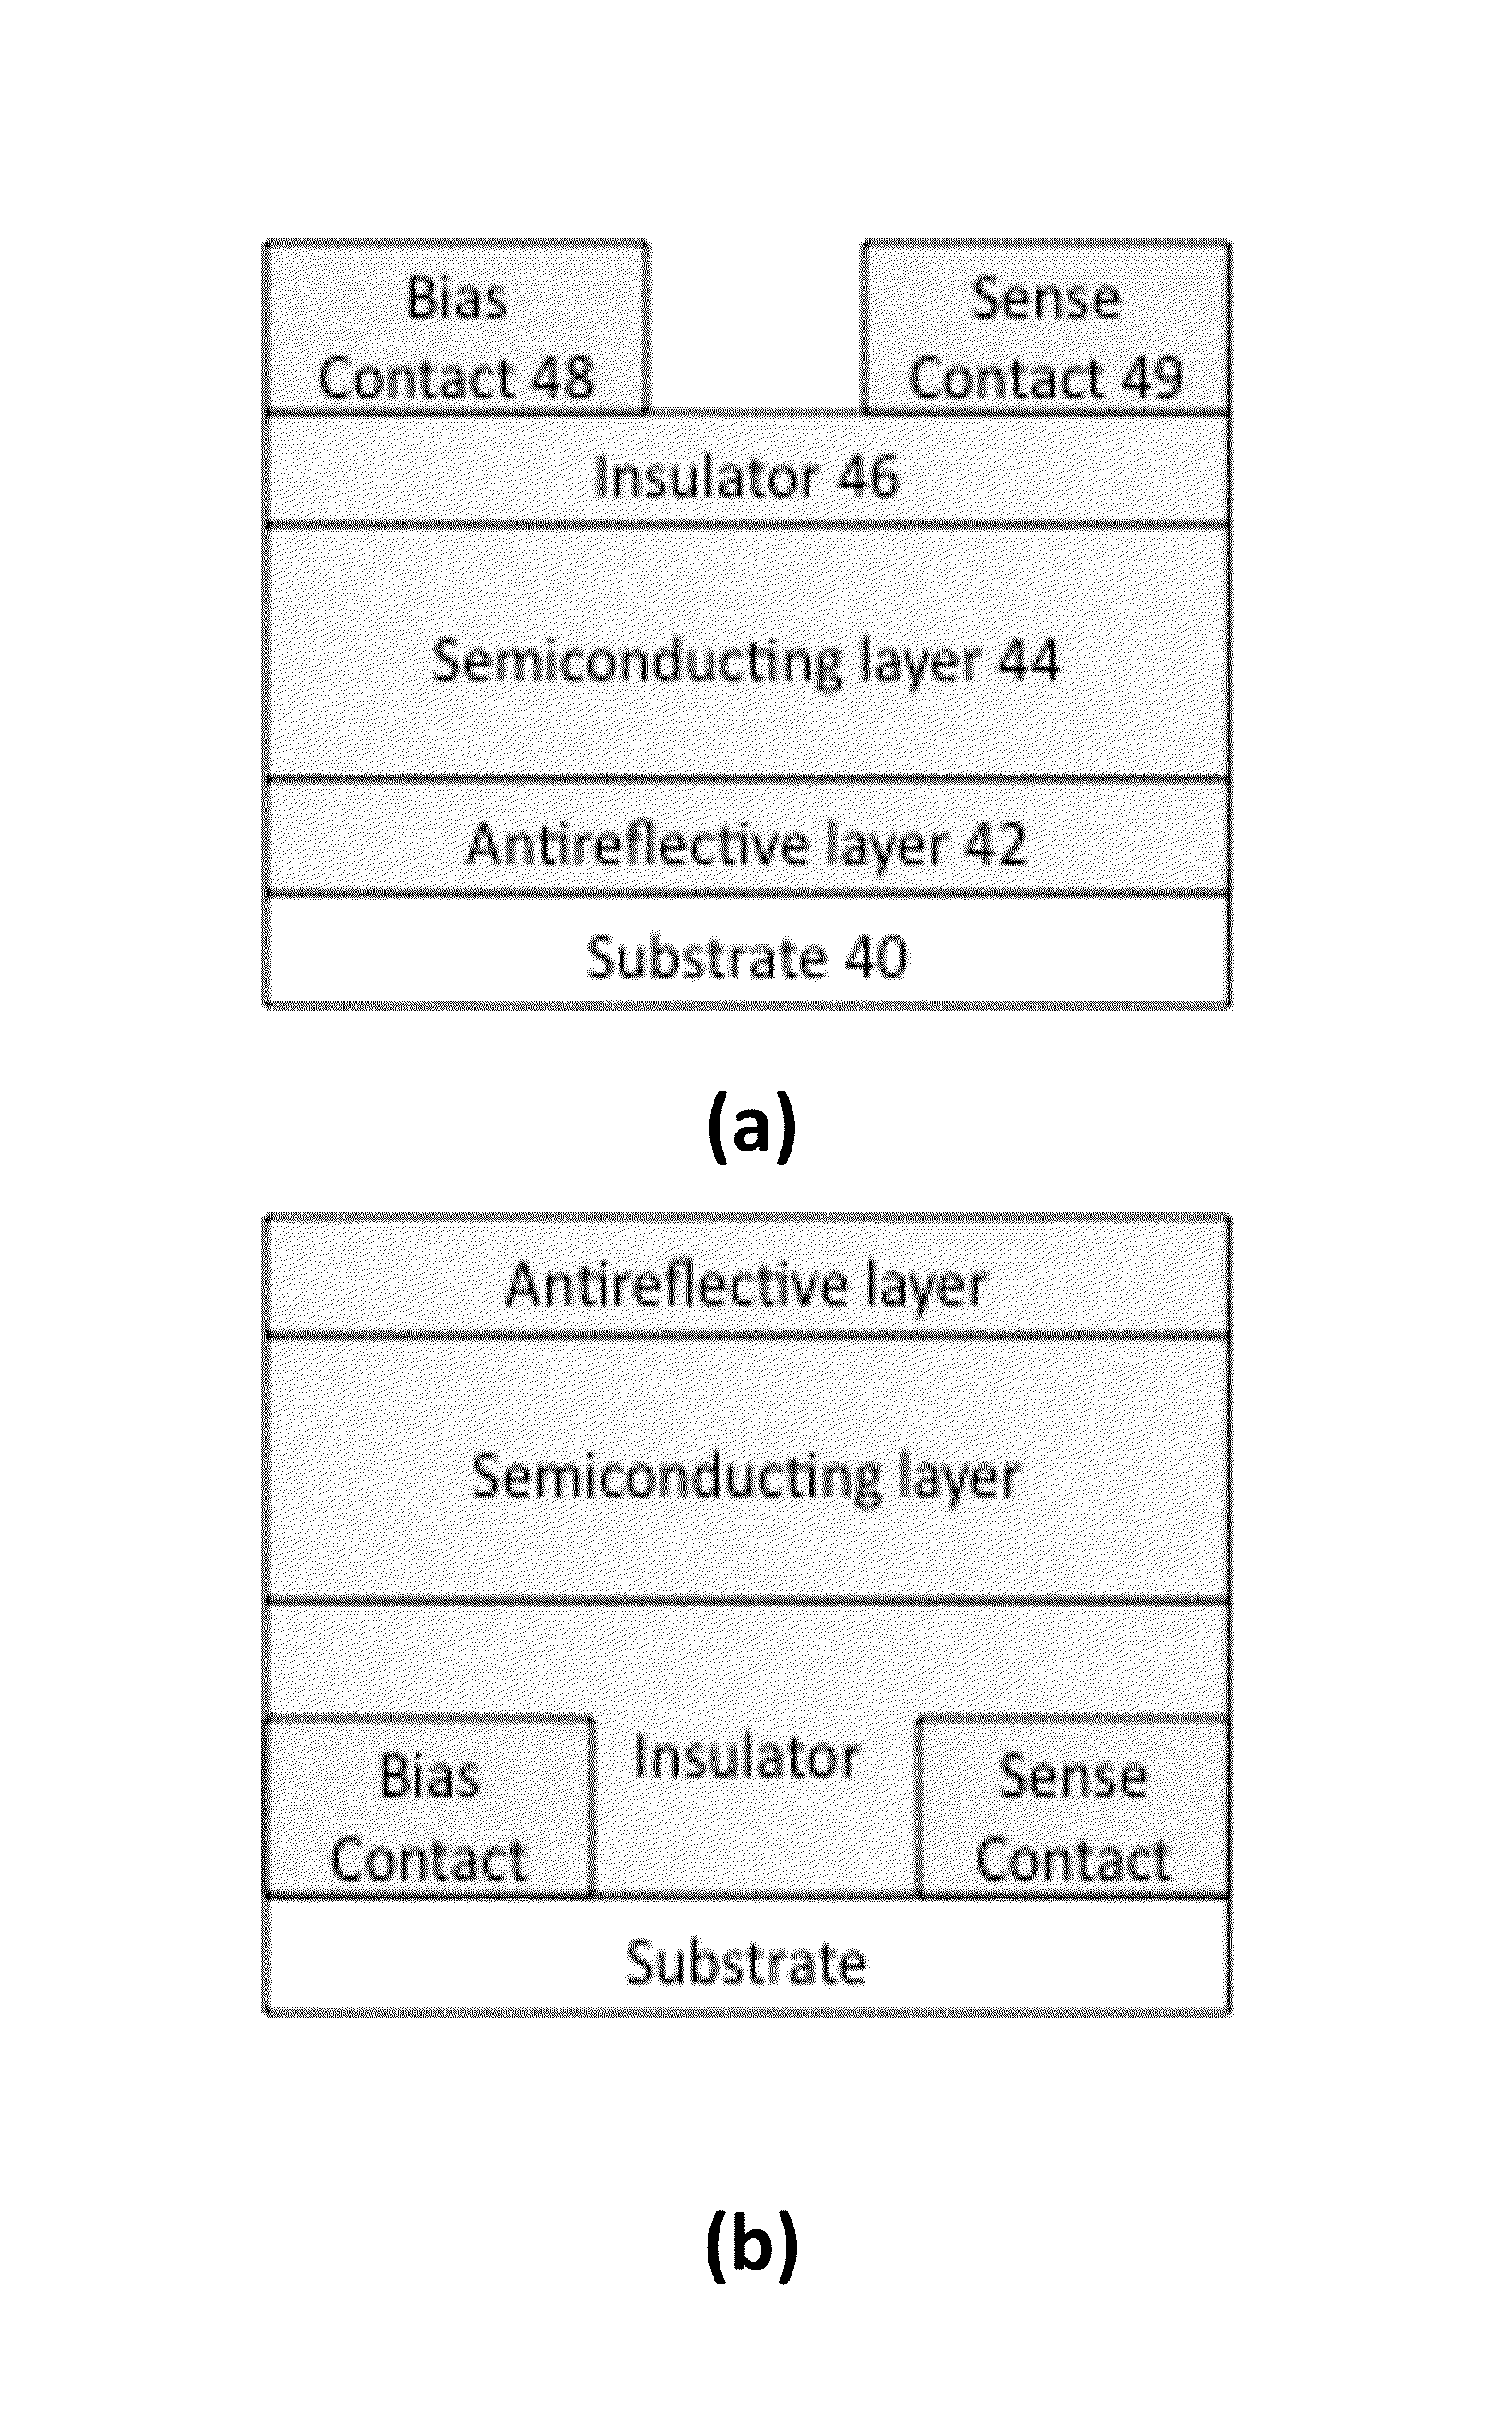 Photoconductive element for radiation detection in a radiography imaging system